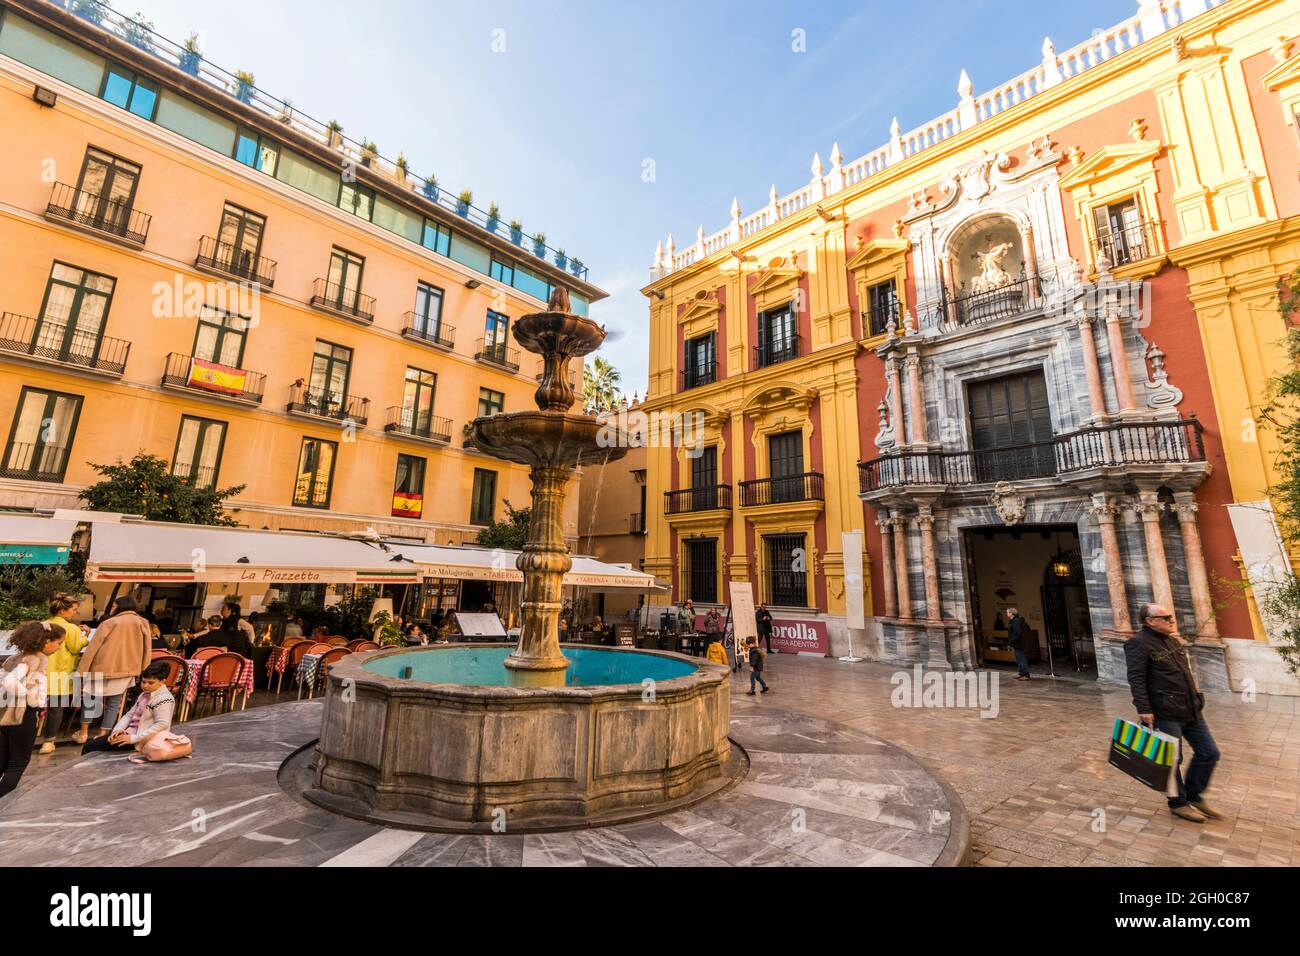 Malaga, Spain. The Plaza del Obispo (Bishop Square), with the Palacio Episcopal (Bishop Palace). A city in Andalucia, in the South of Spain Stock Photo